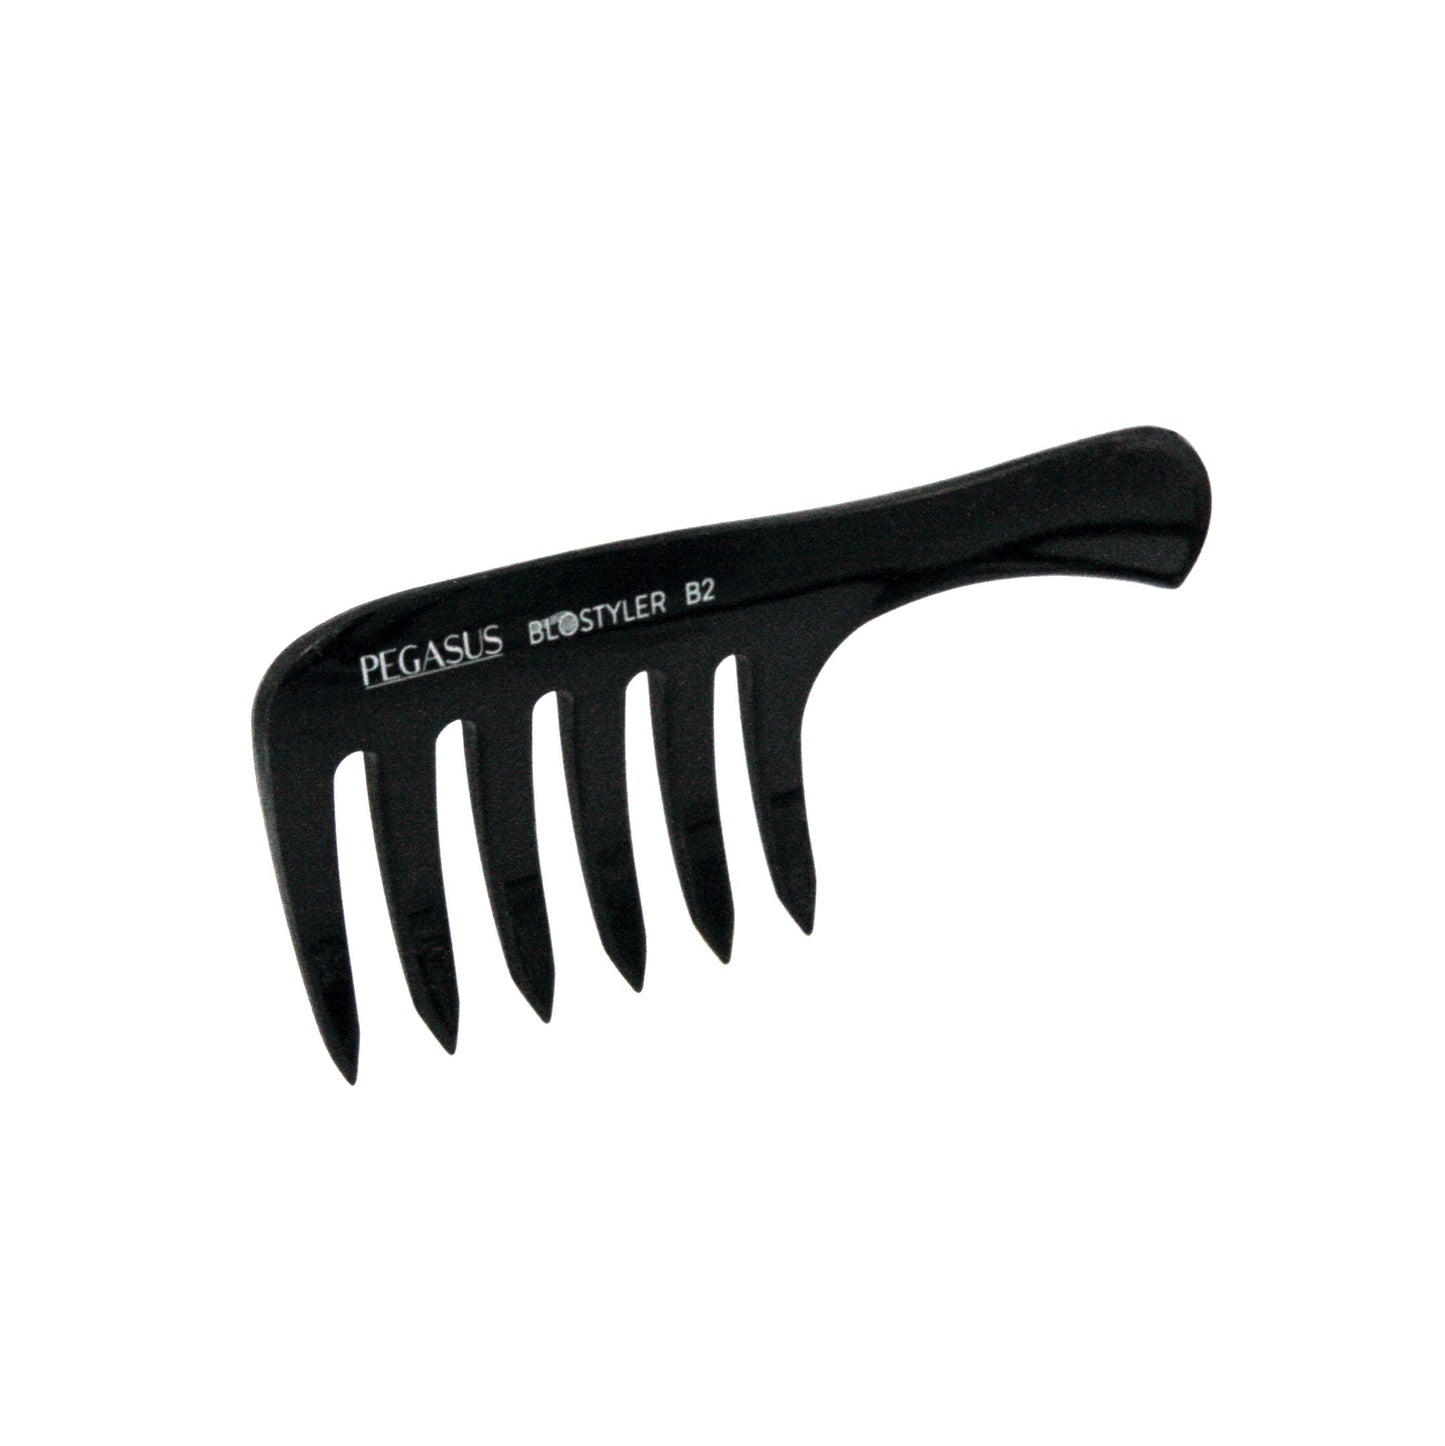 Pegasus 507_b2, 6.5in Curved Detangling Handled Styling Rake Comb, Seamless, Smooth Edges, Anti Static, Heat and Chemically Resistant, Wet Hair, Everyday Grooming Comb | Peines de goma dura - Black